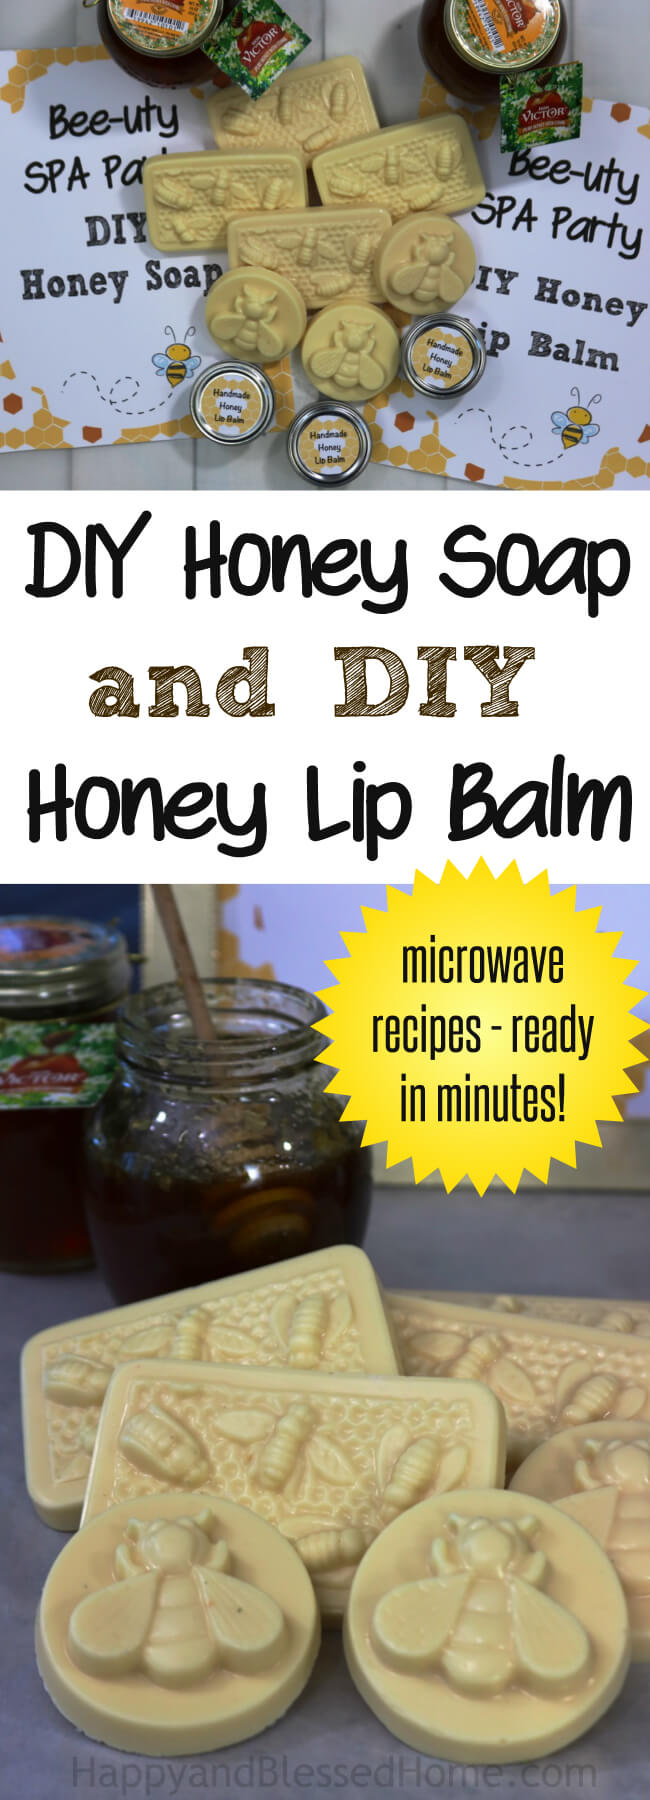 Easy Microwave Recipes for DIY Honey Soap and DIY Honey Lip Balm - Handmade gifts ready in minutes